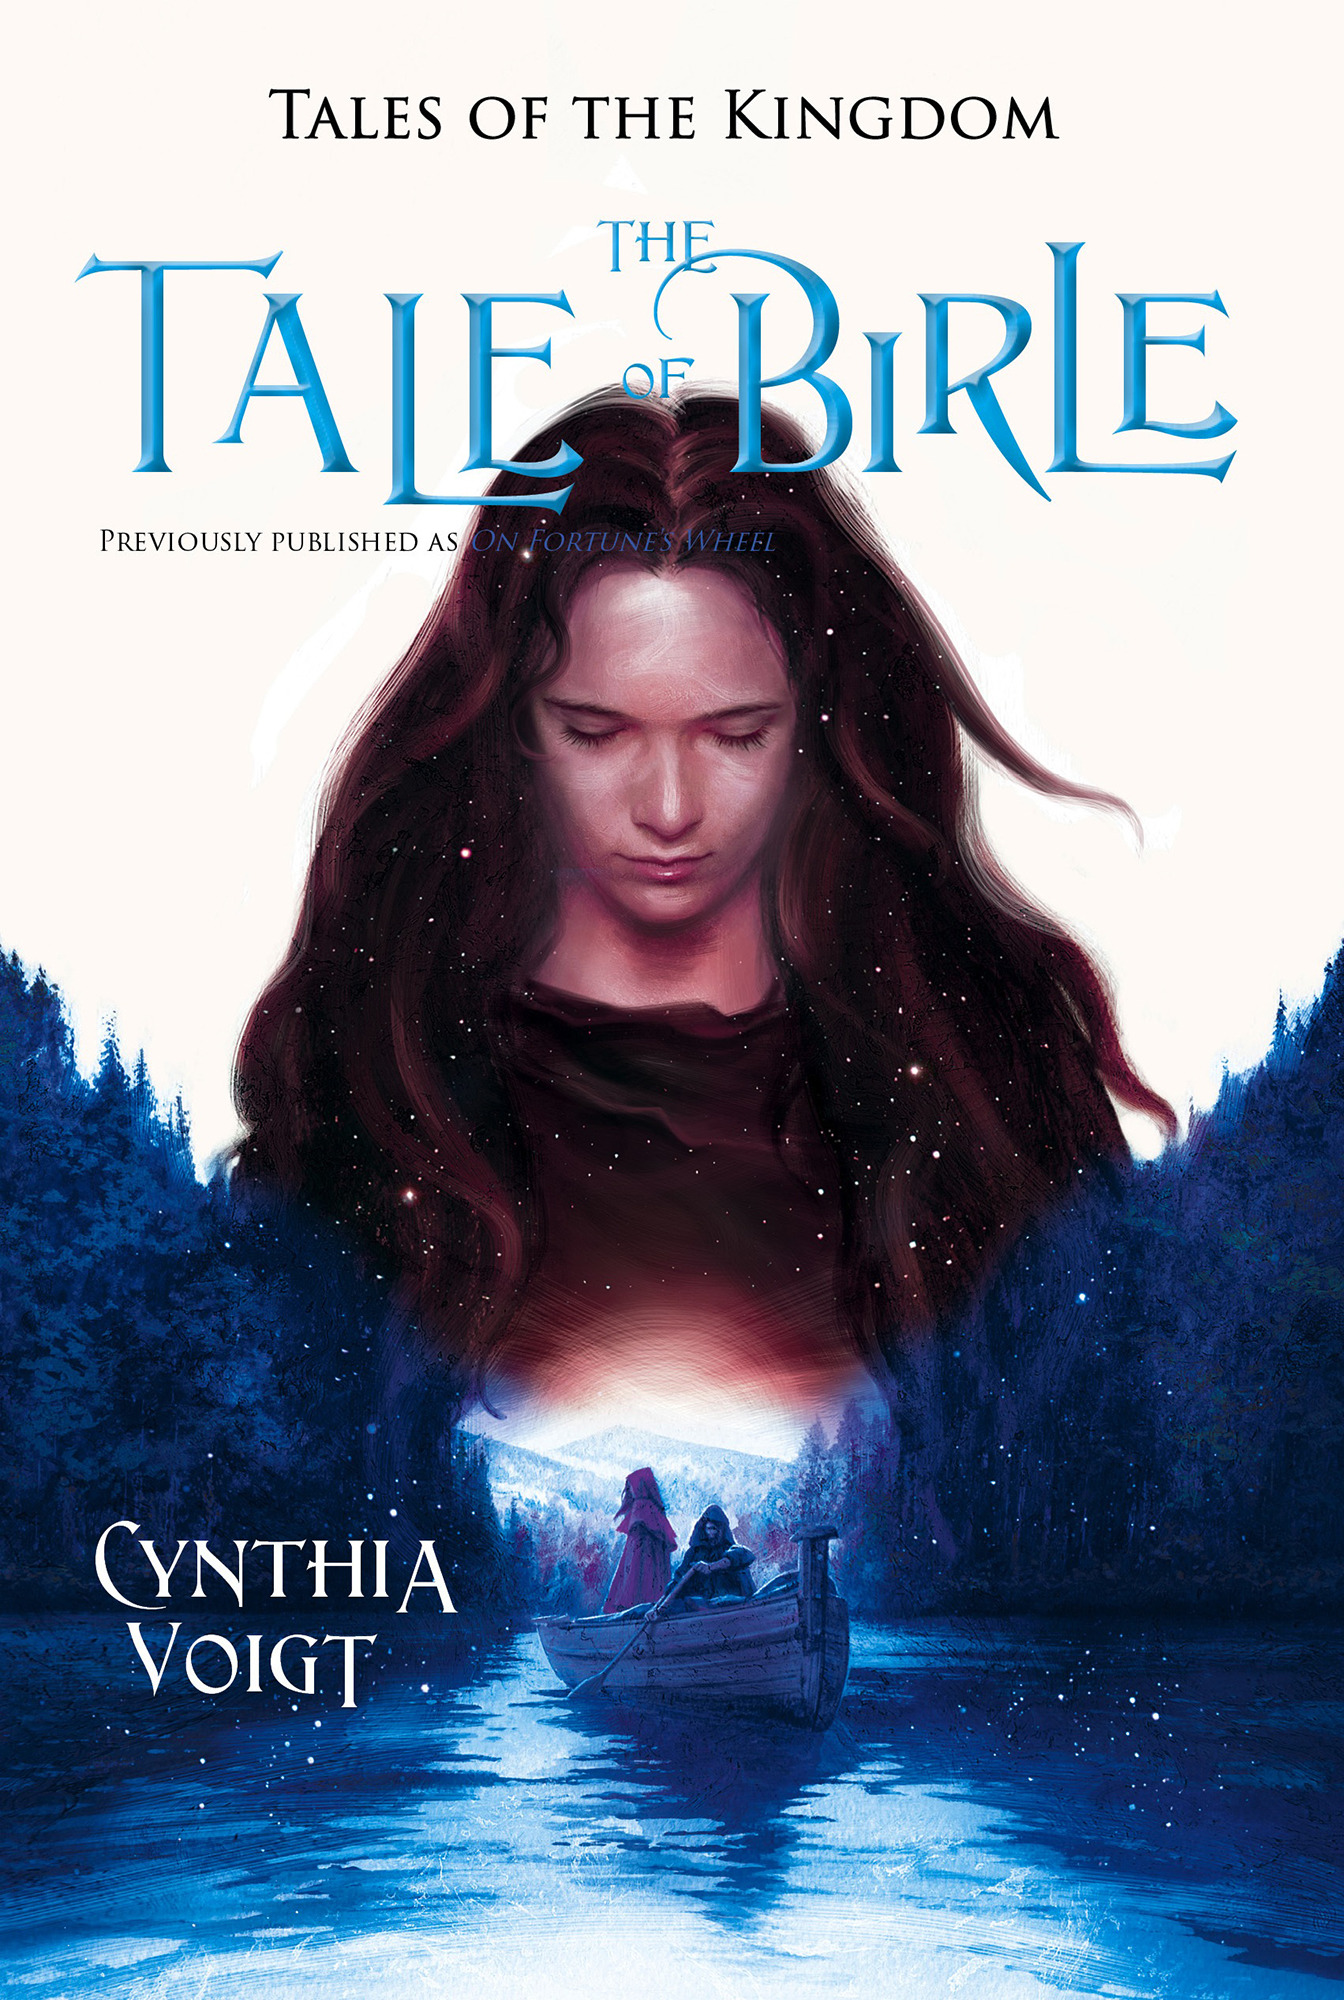 Tale of Birle by Cynthia Voigt